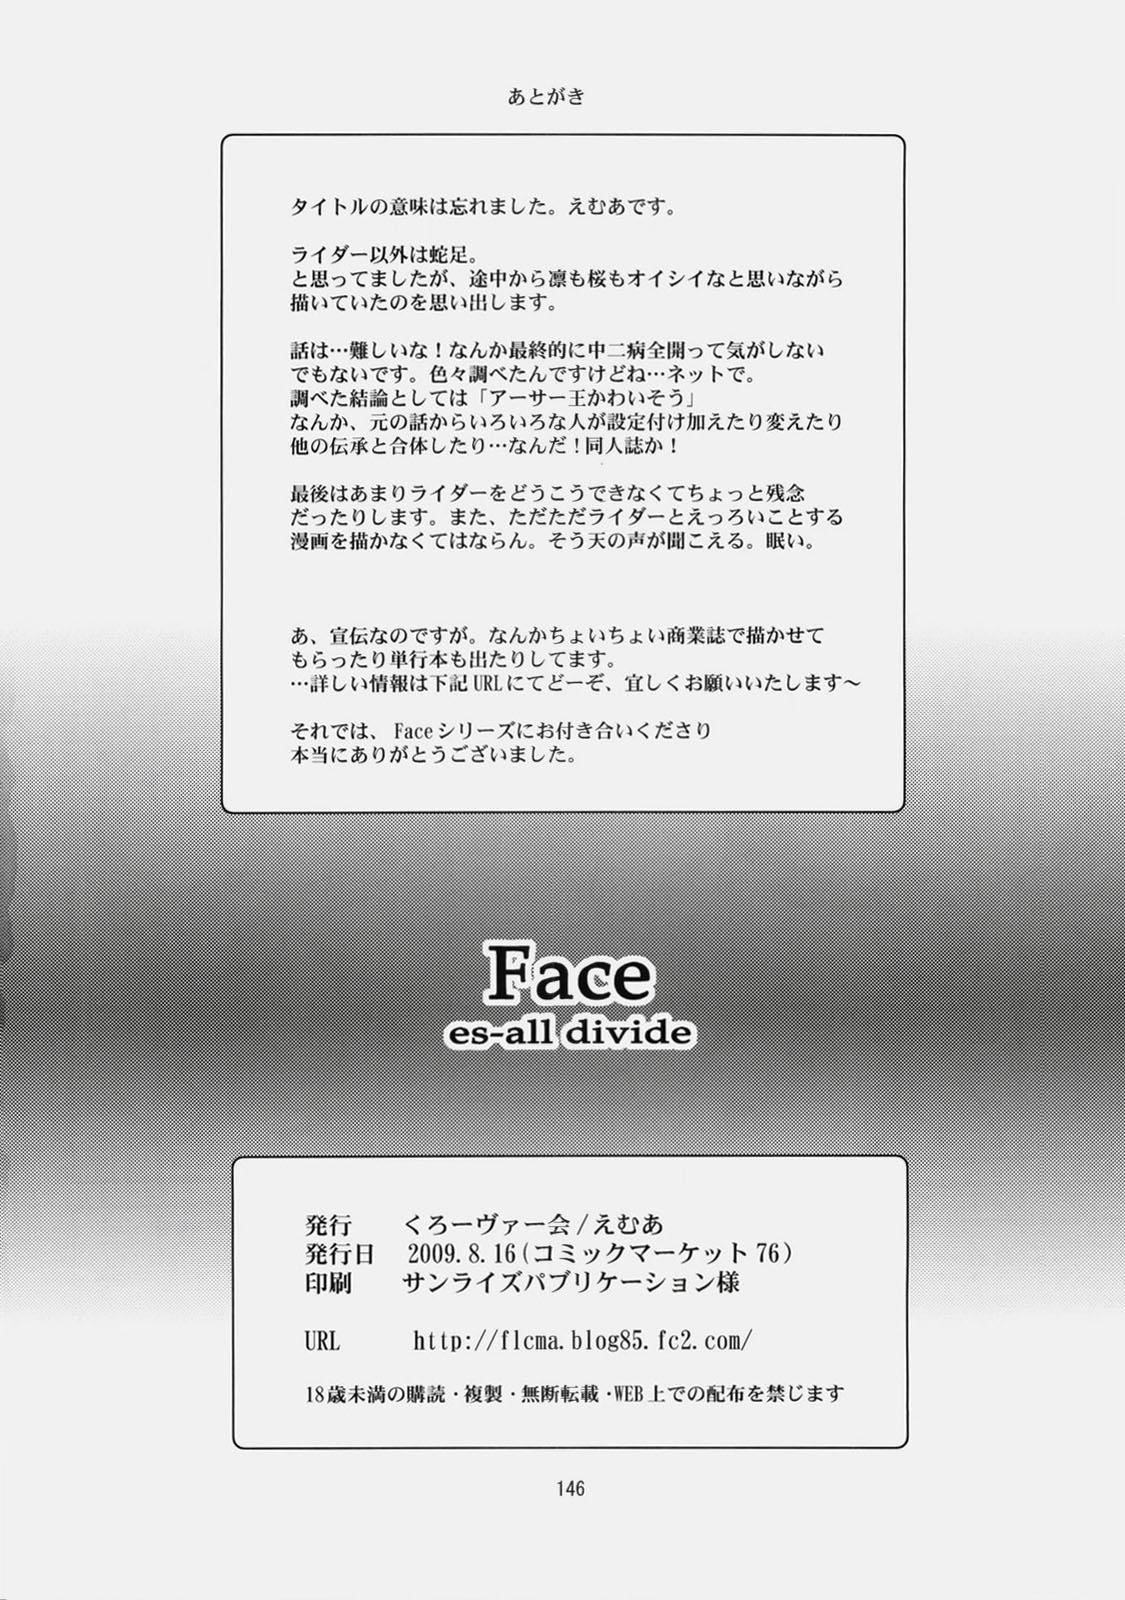 Hardcore Porn Free Face es-all divide - Fate stay night Freaky - Page 143